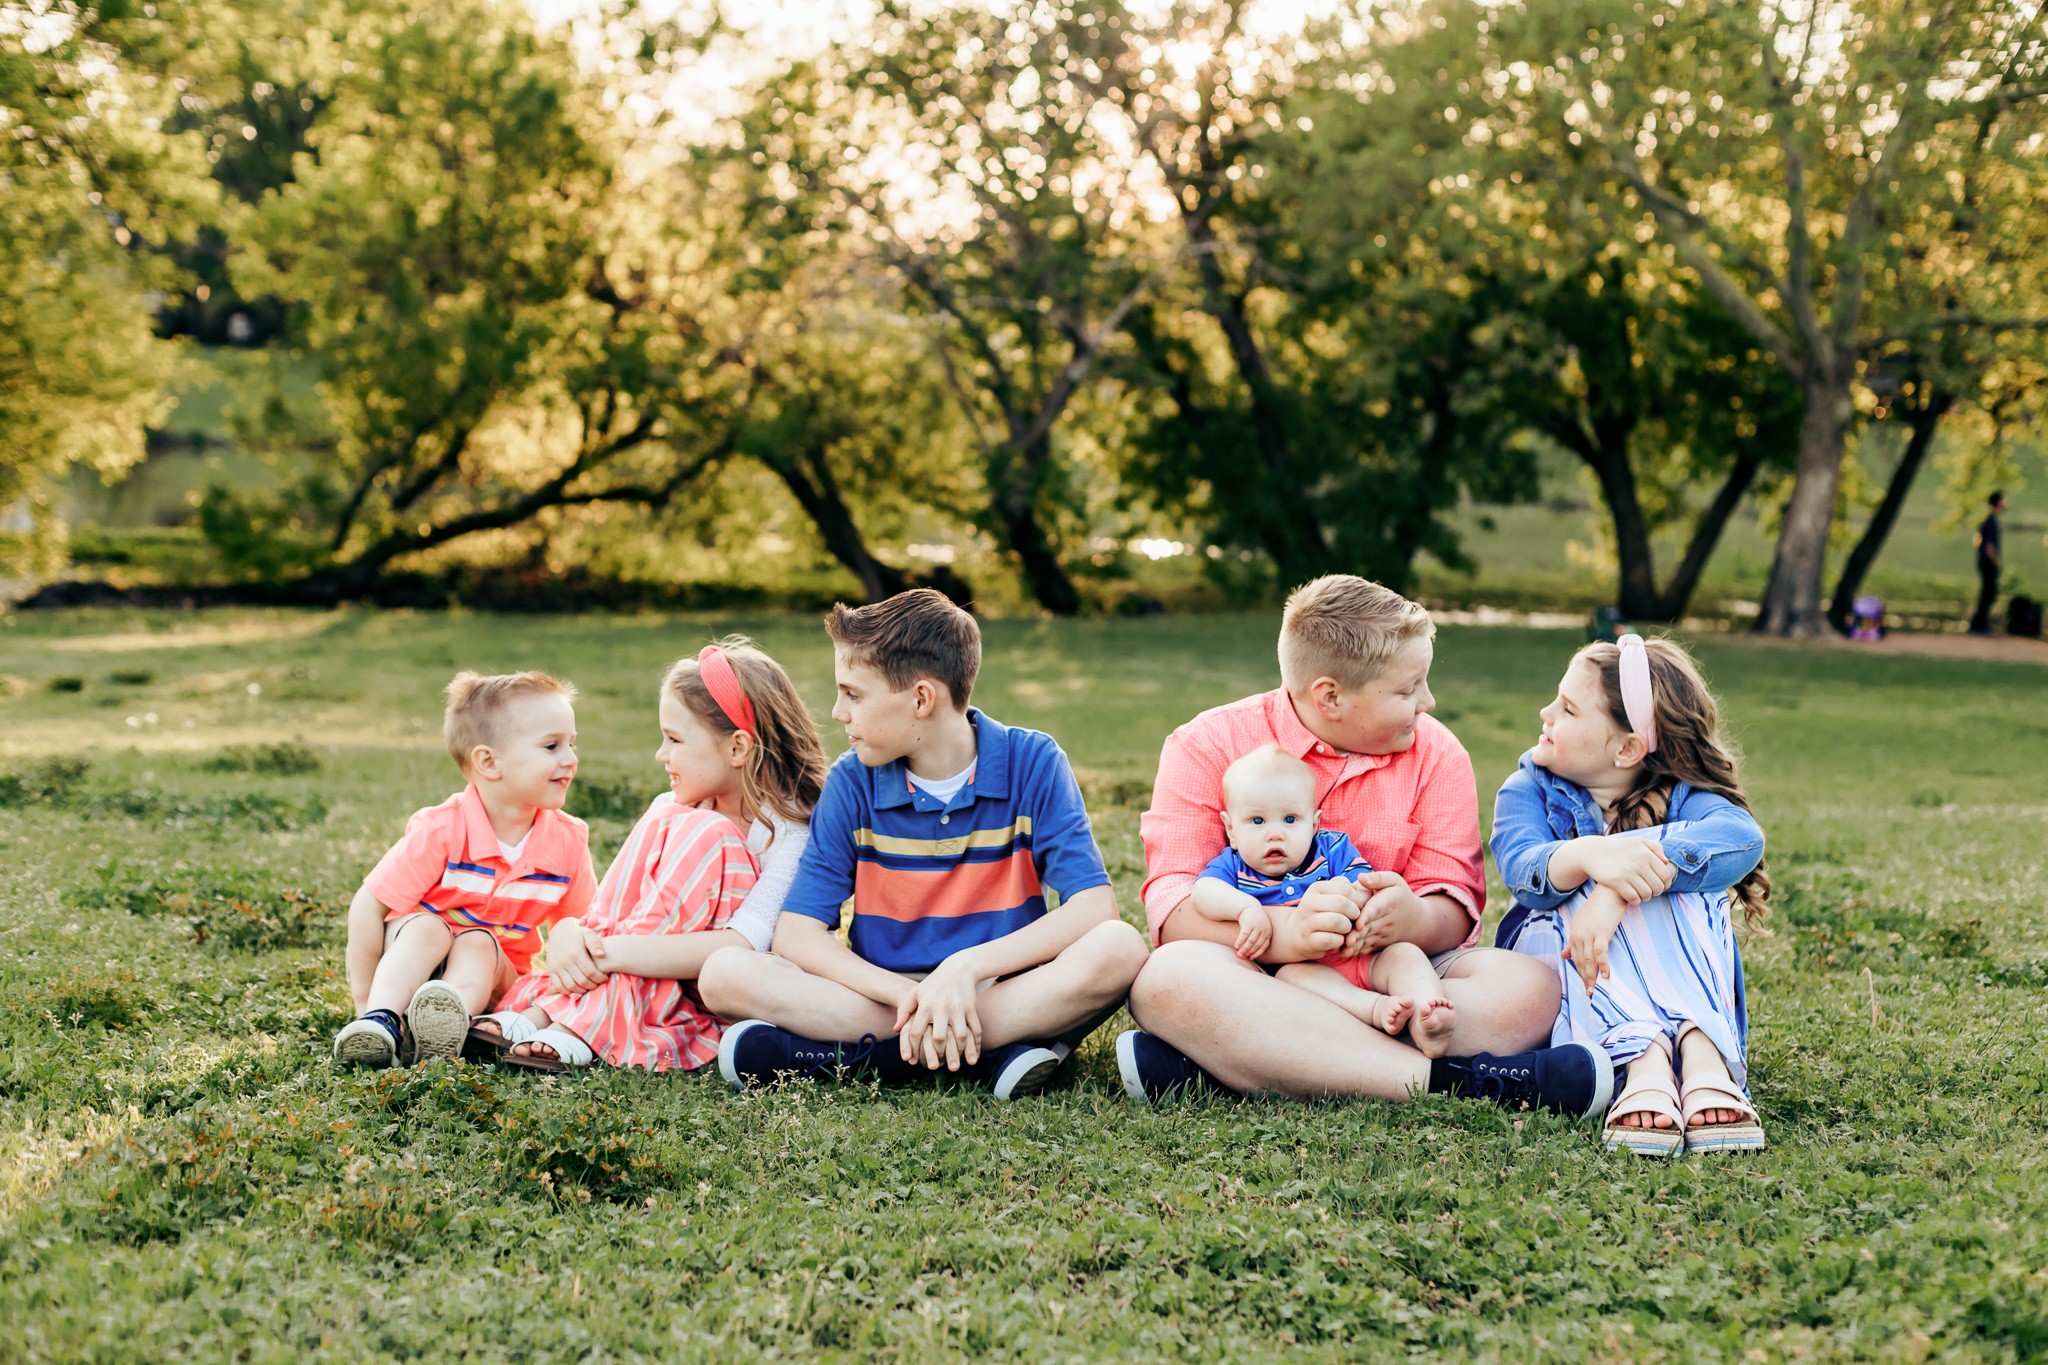 6 siblings sit together on the grass during golden hour. 